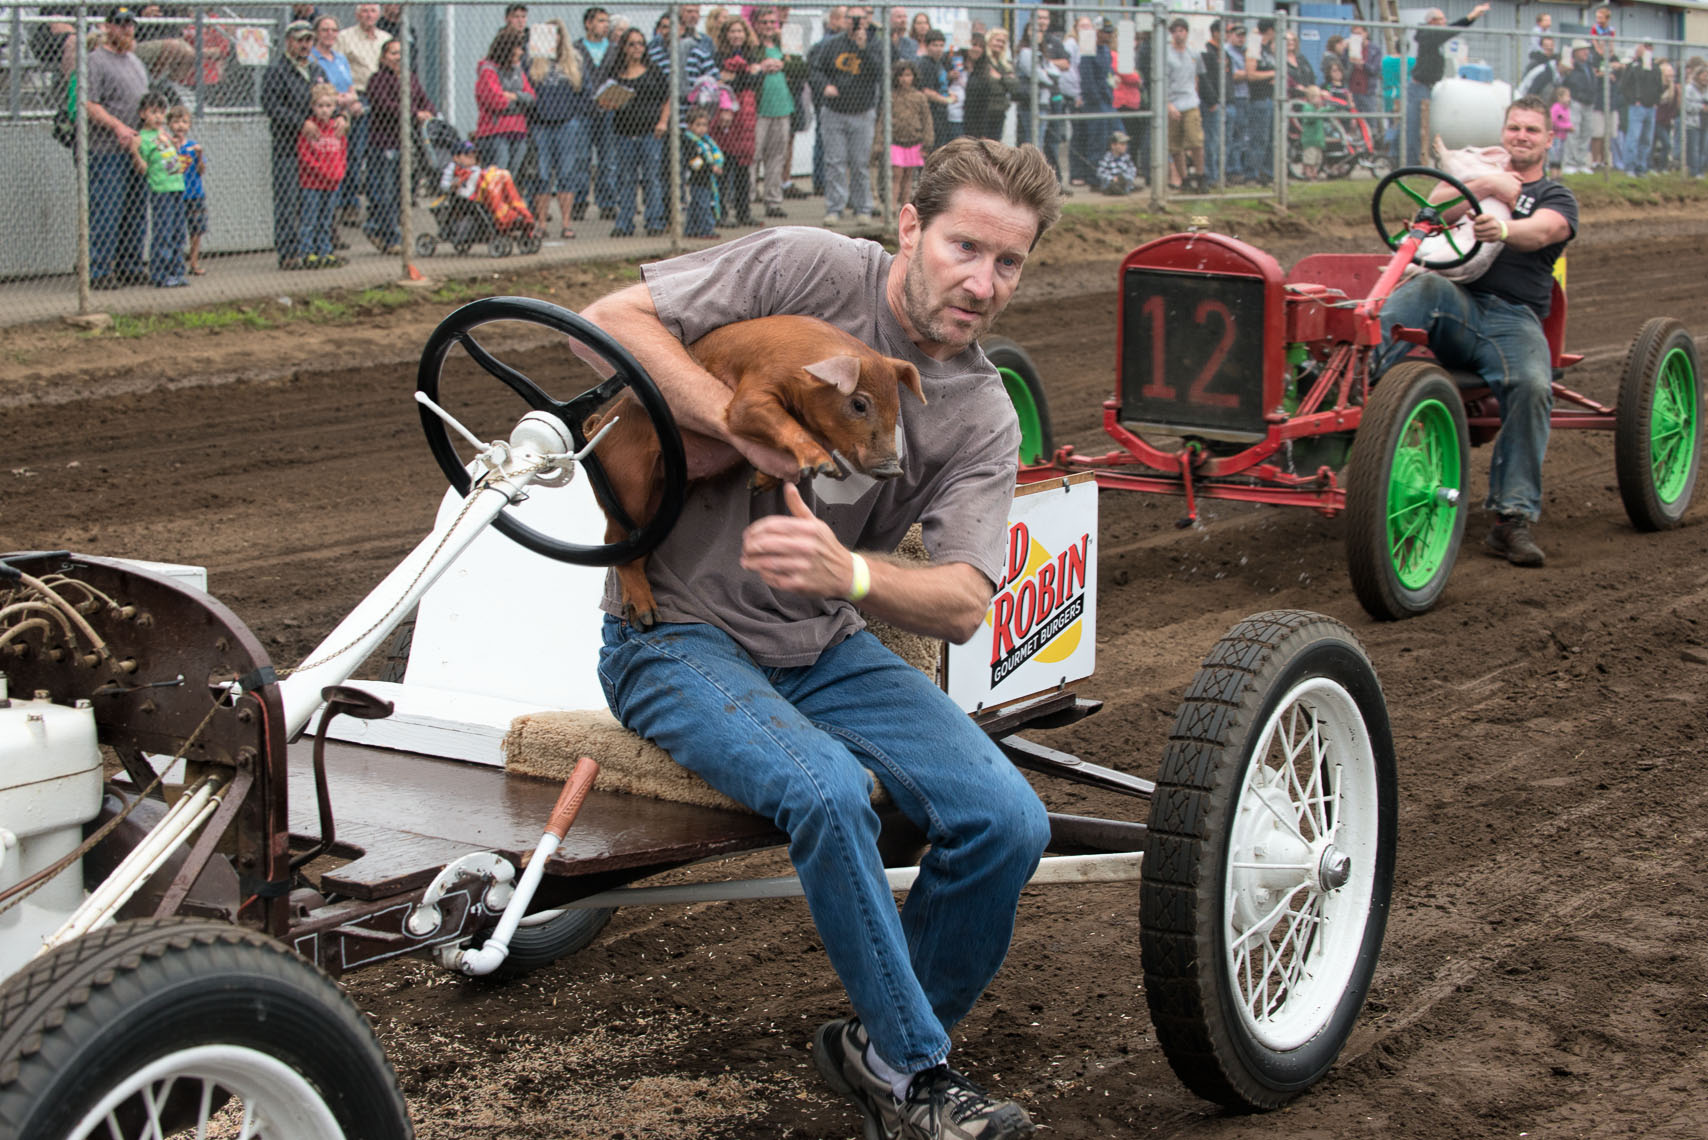 Pig and Ford Races, William Bragg, editorial photographer, Portland, Oregon